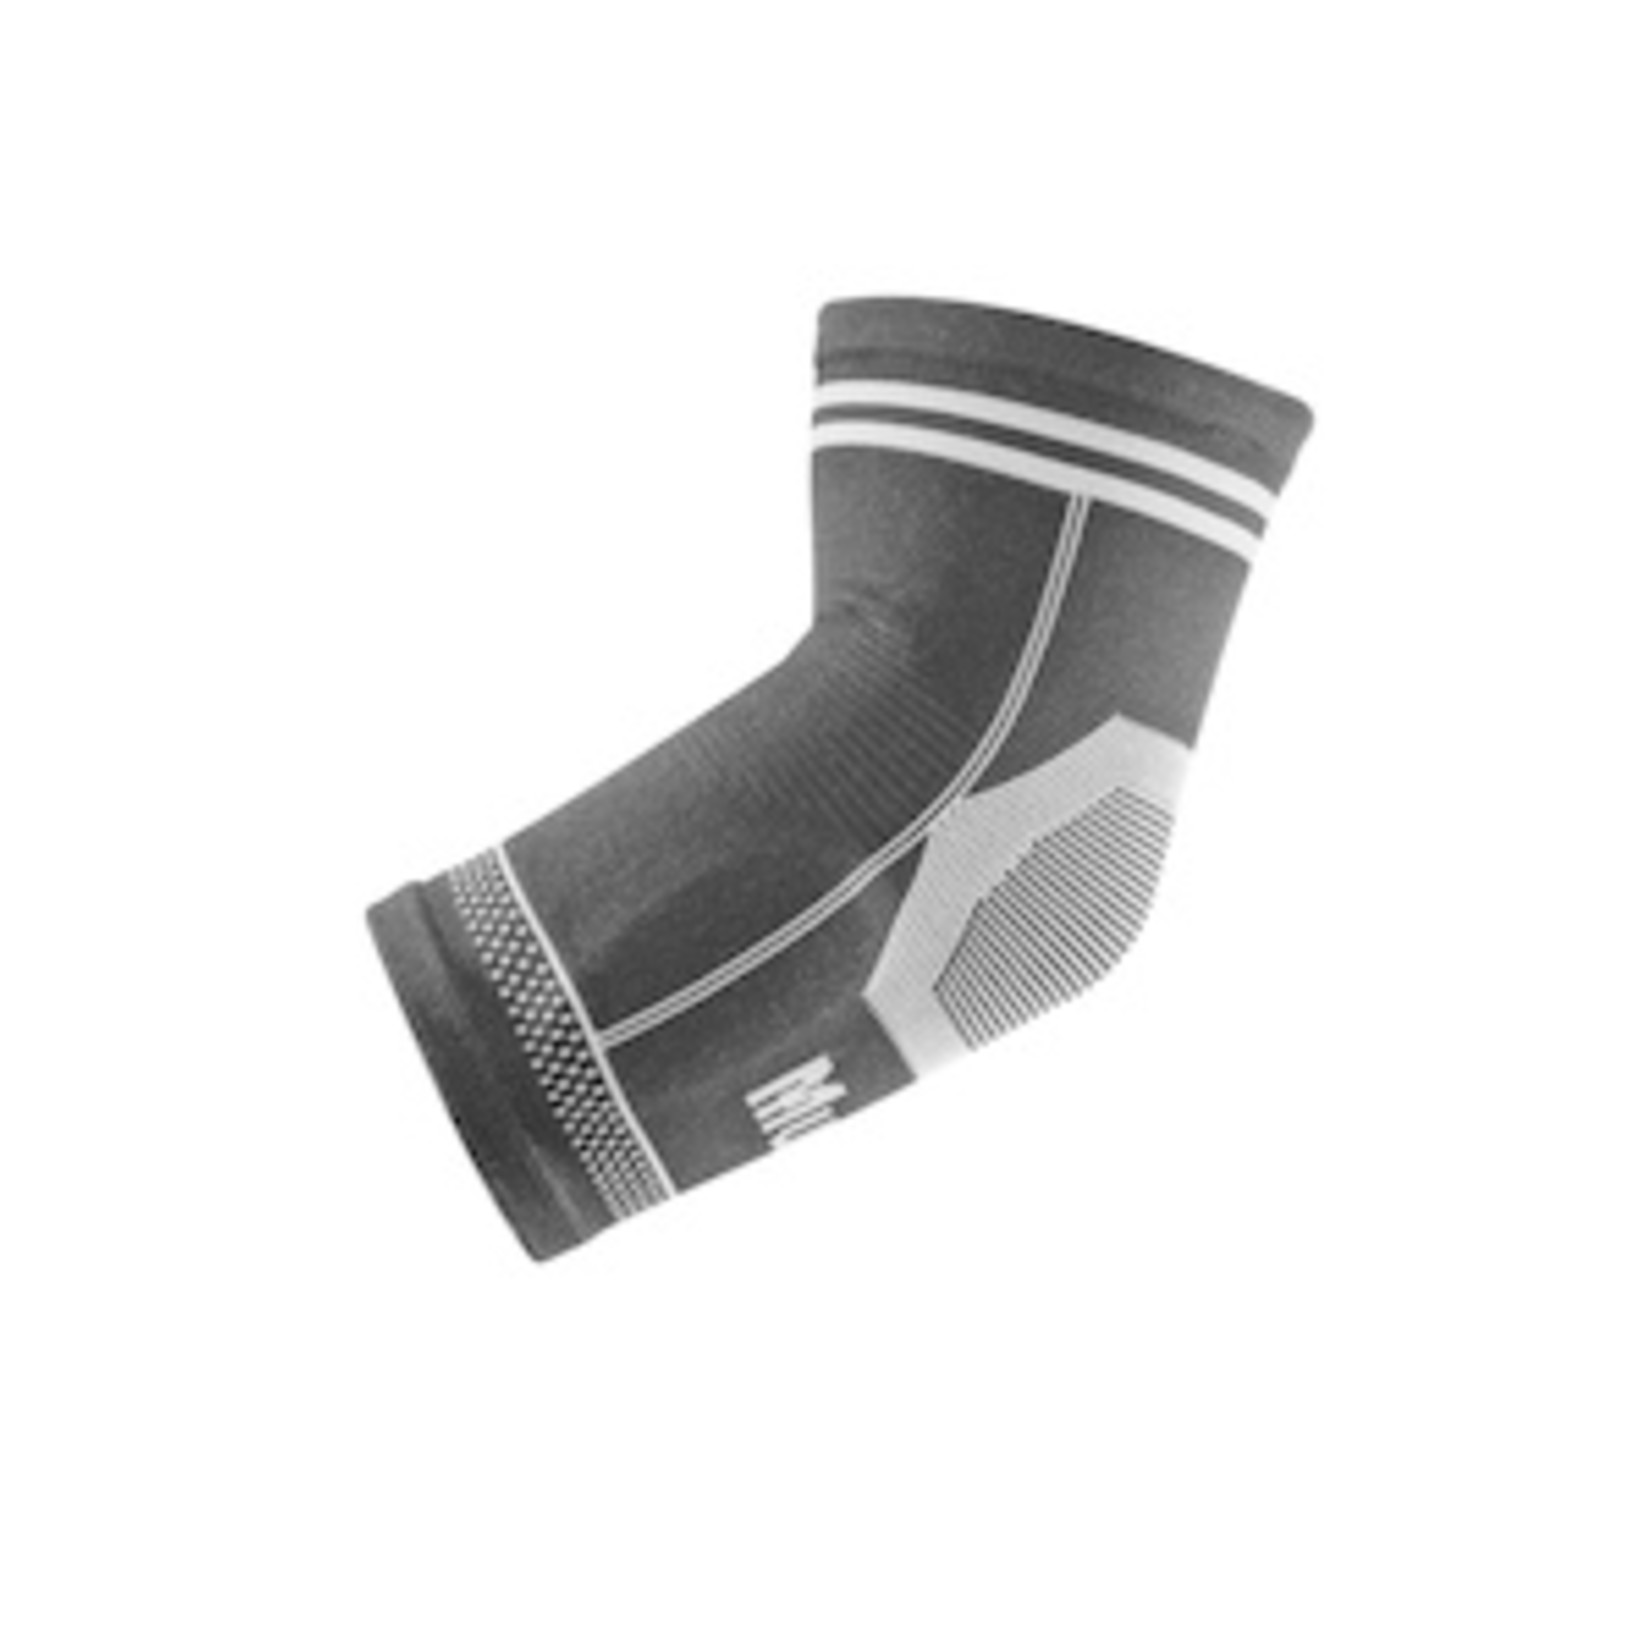 6334 - Mueller - 4-Way Stretch Elbow Support - (Large / X-Large) - NDC # 74676-6334-04